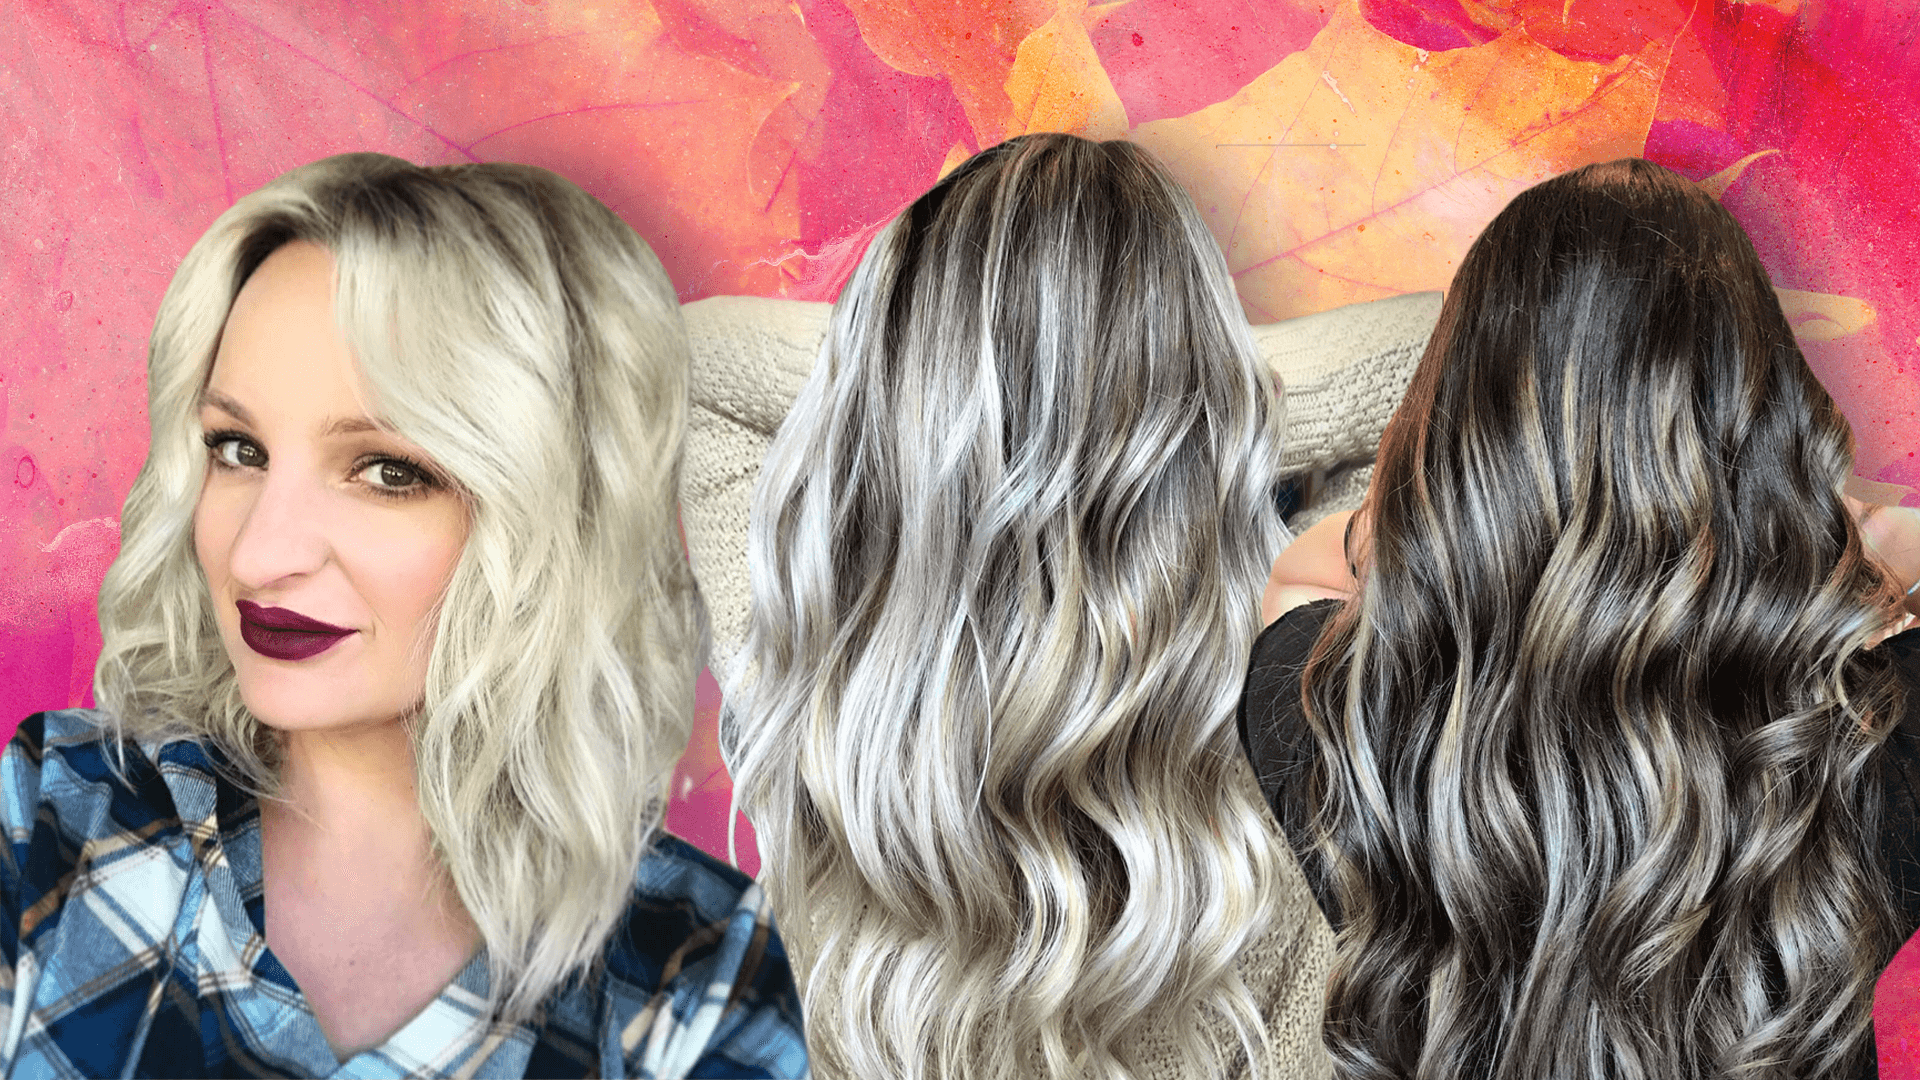 Fall's Hottest Hair Trend: Reverse Balayage - The Tease